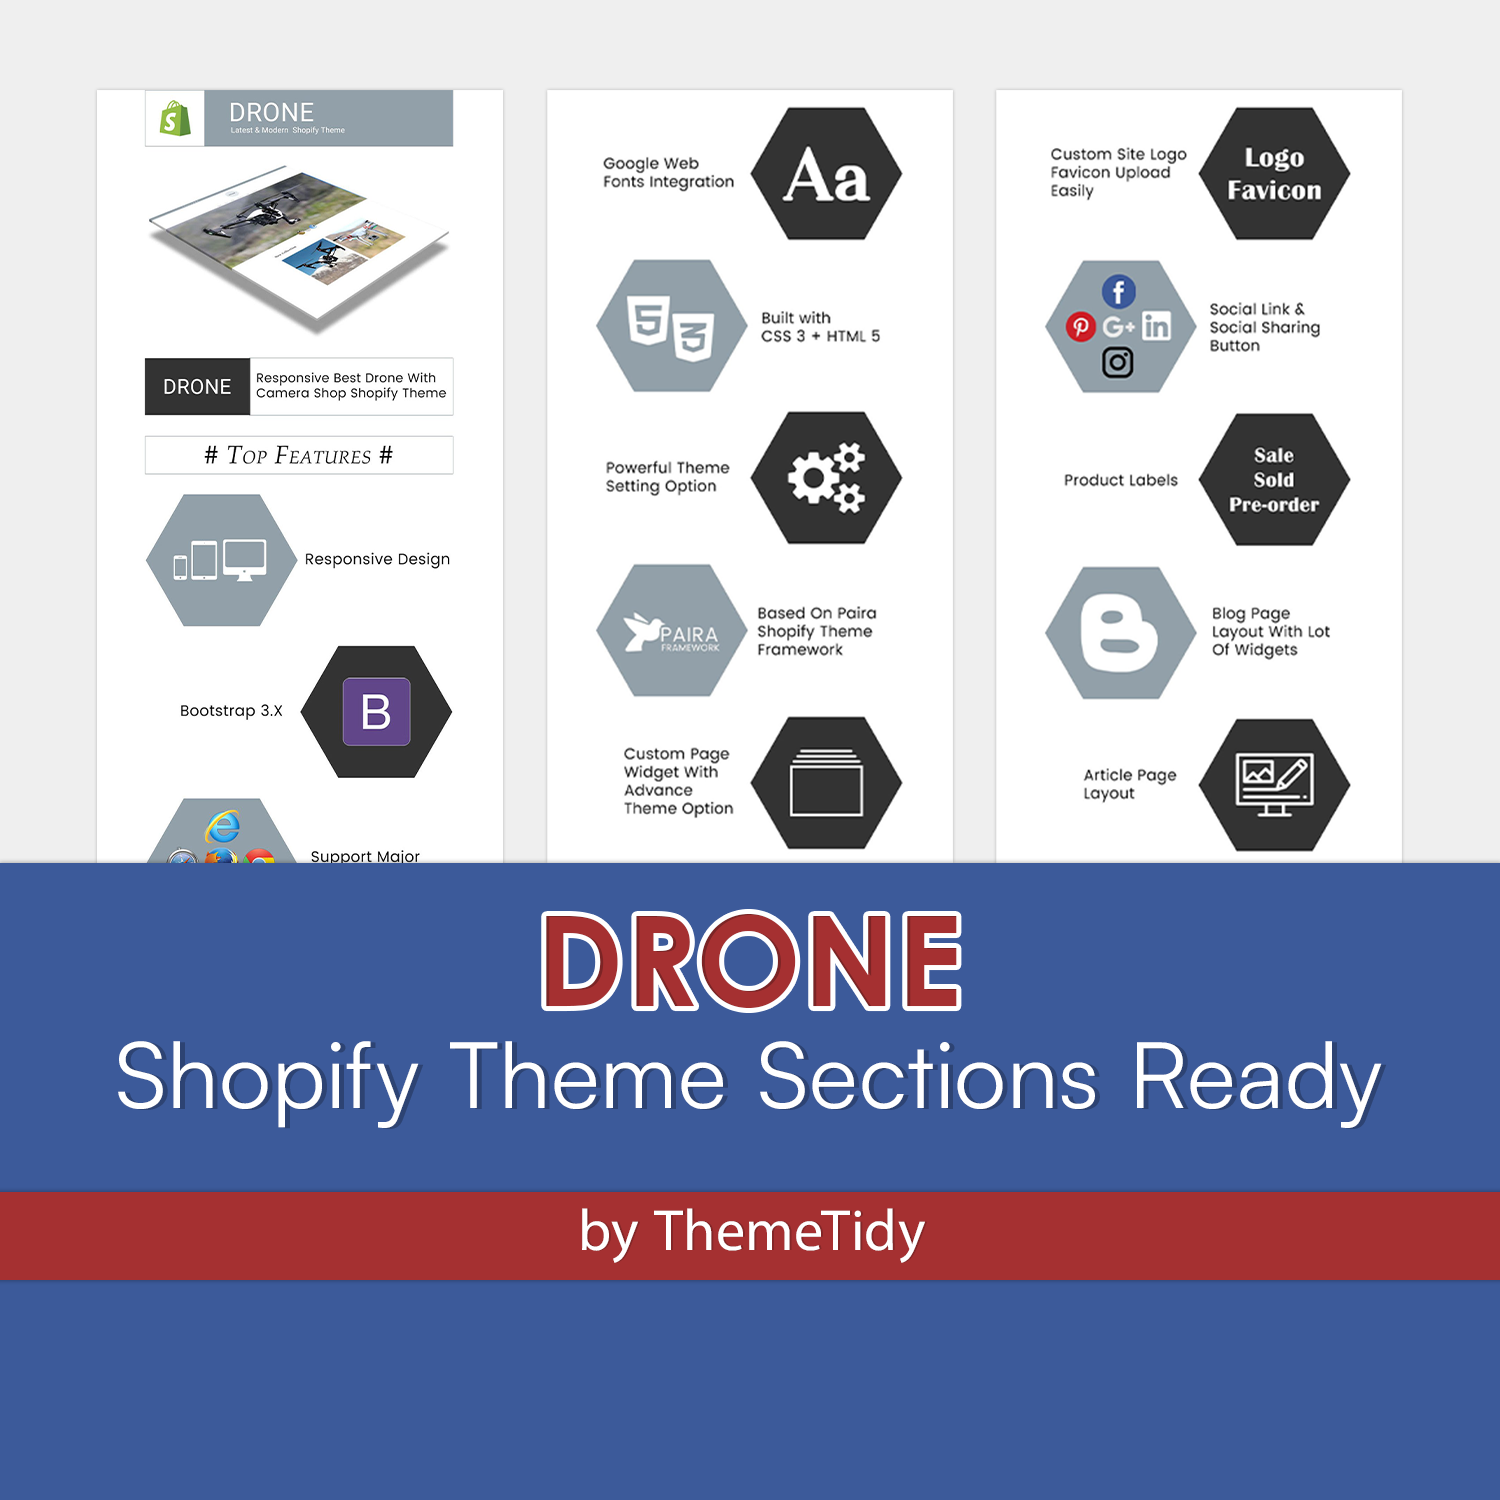 Preview drone shopify theme sections ready.